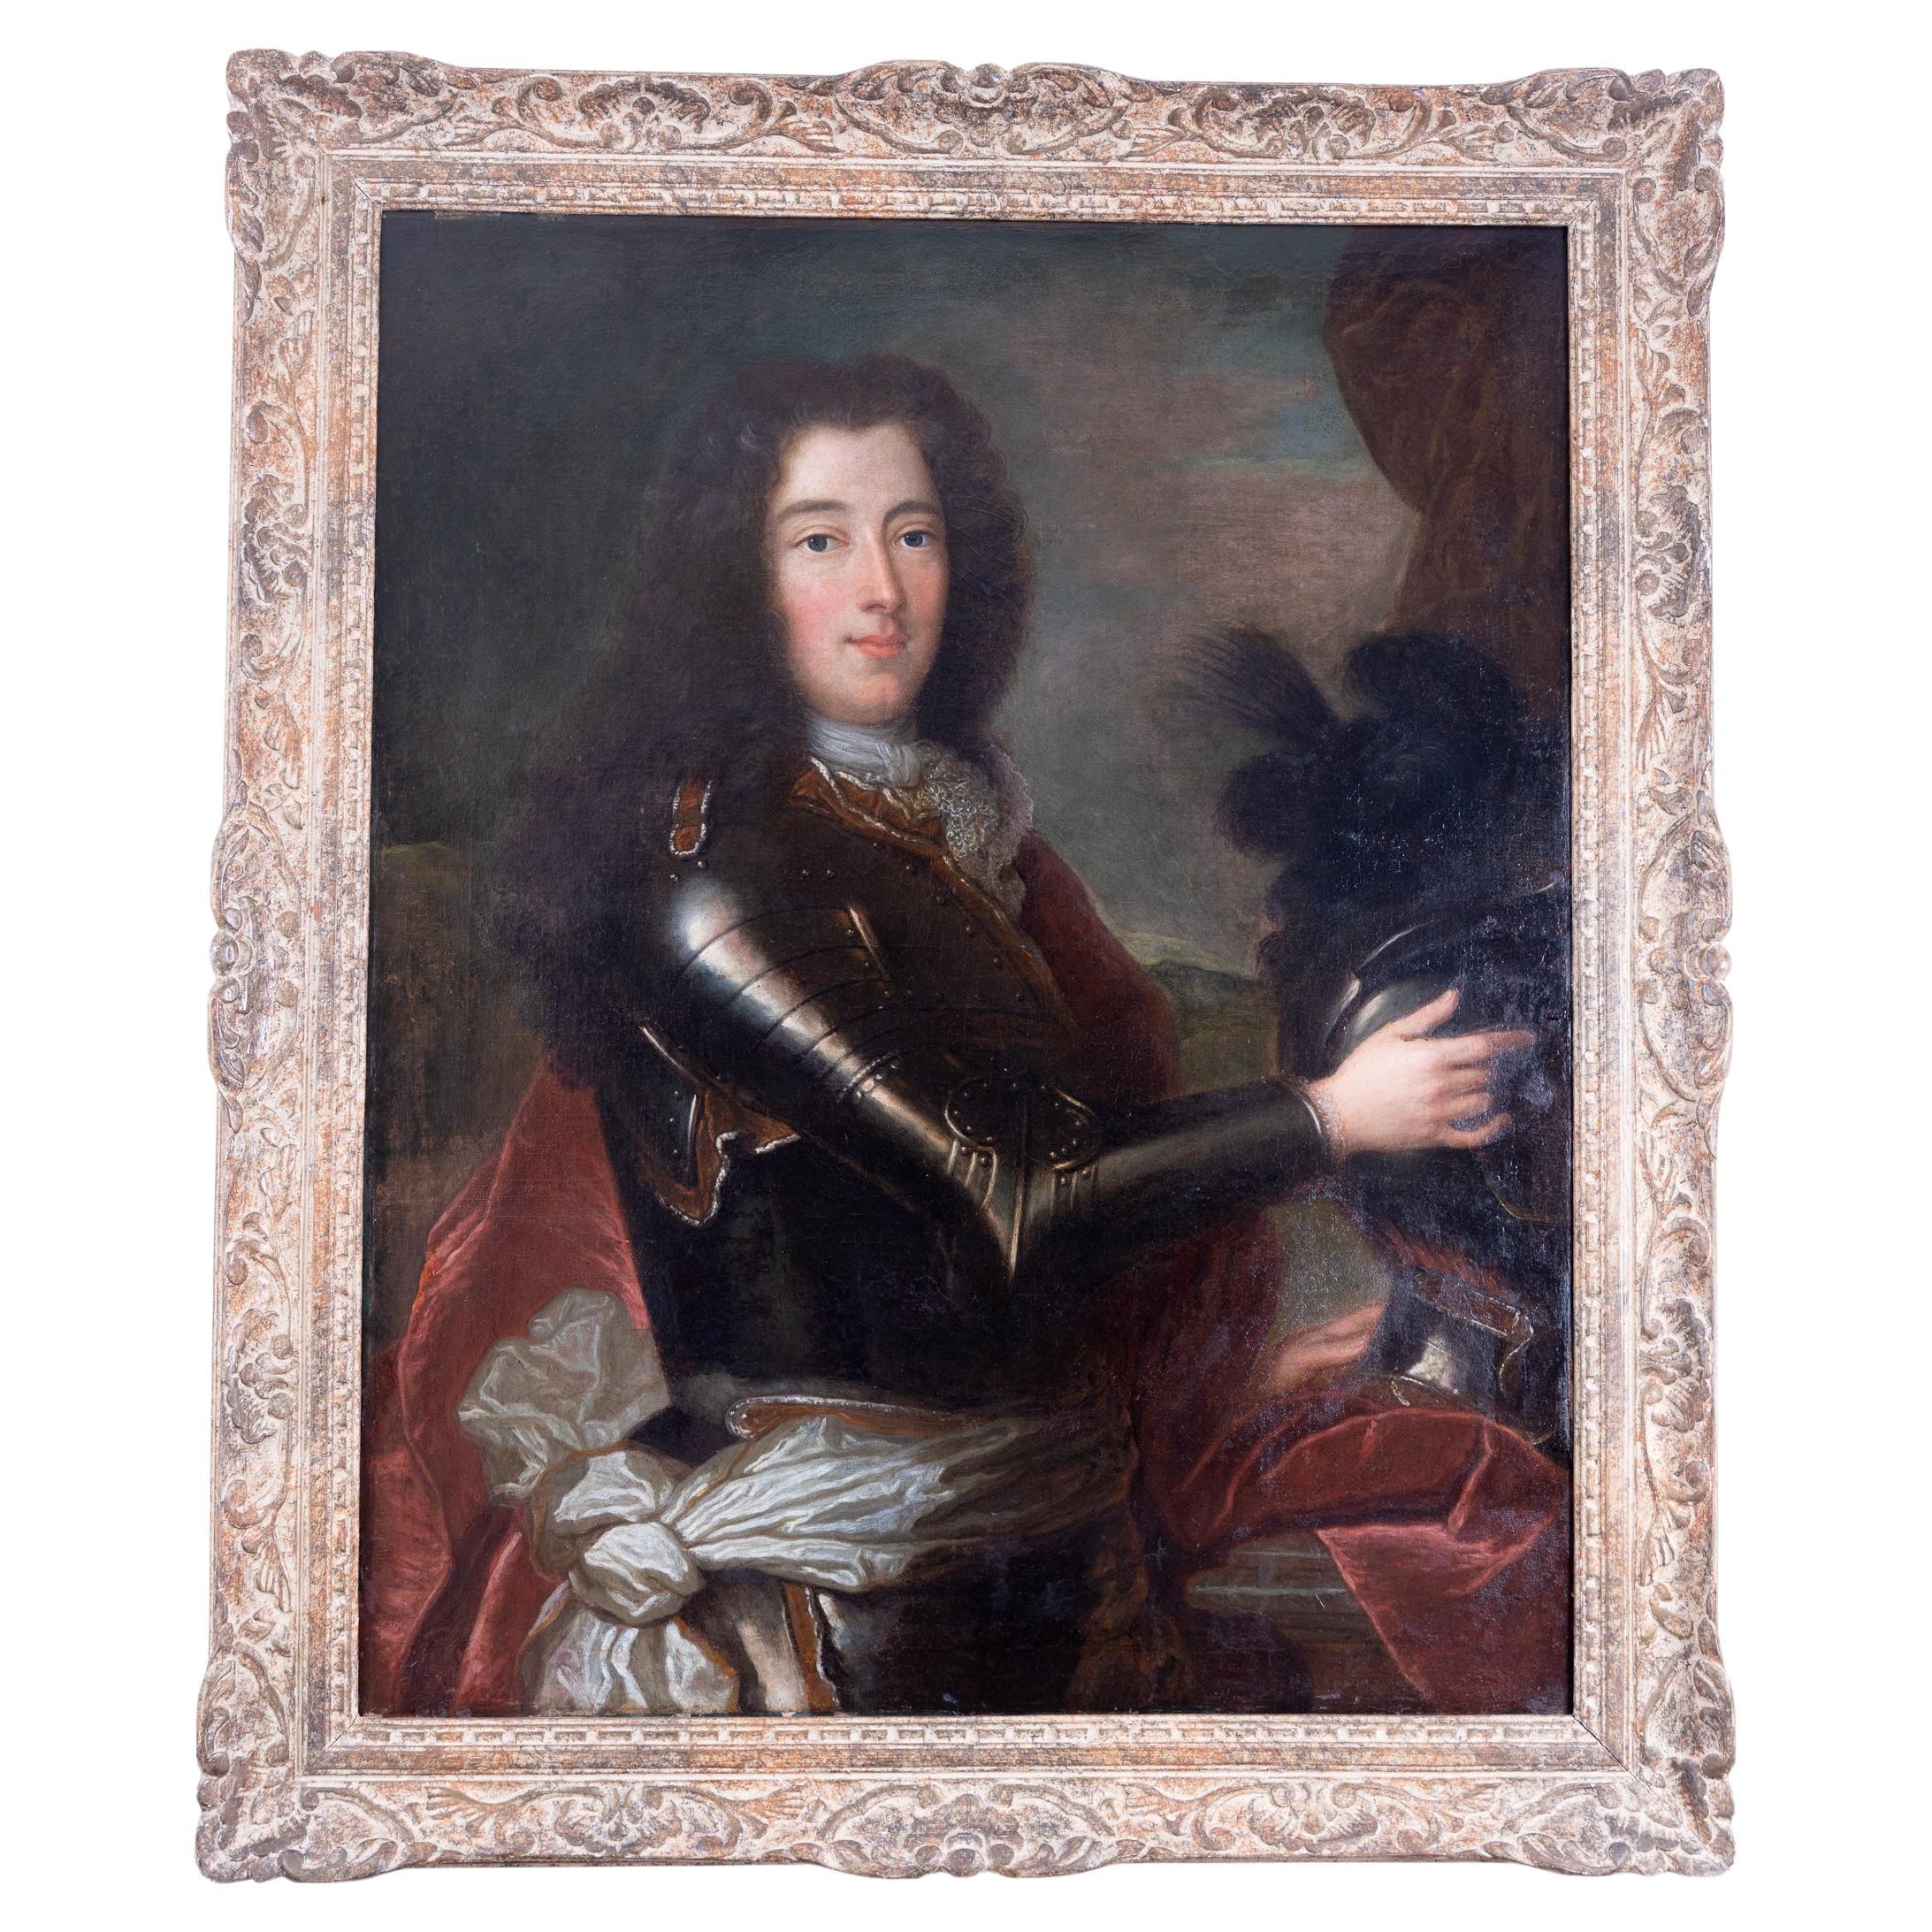 Early 18th Century Portrait of Nobleman Outfitted in Suit of Armour